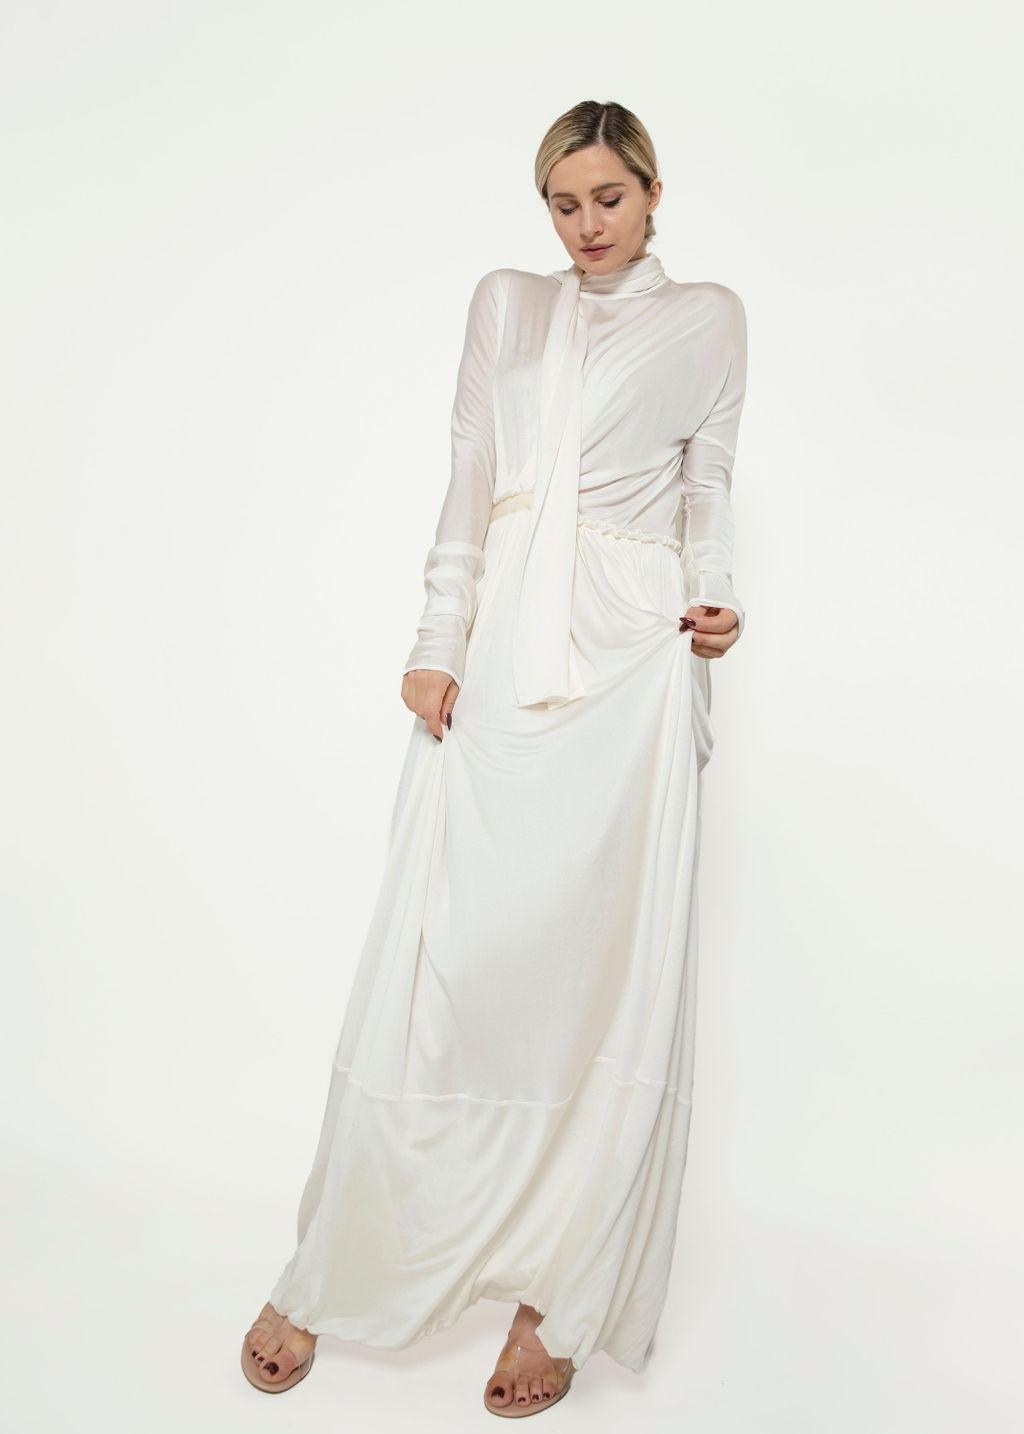 Jil Sander Spring 2020 Silk White Gown In Excellent Condition For Sale In Los Angeles, CA